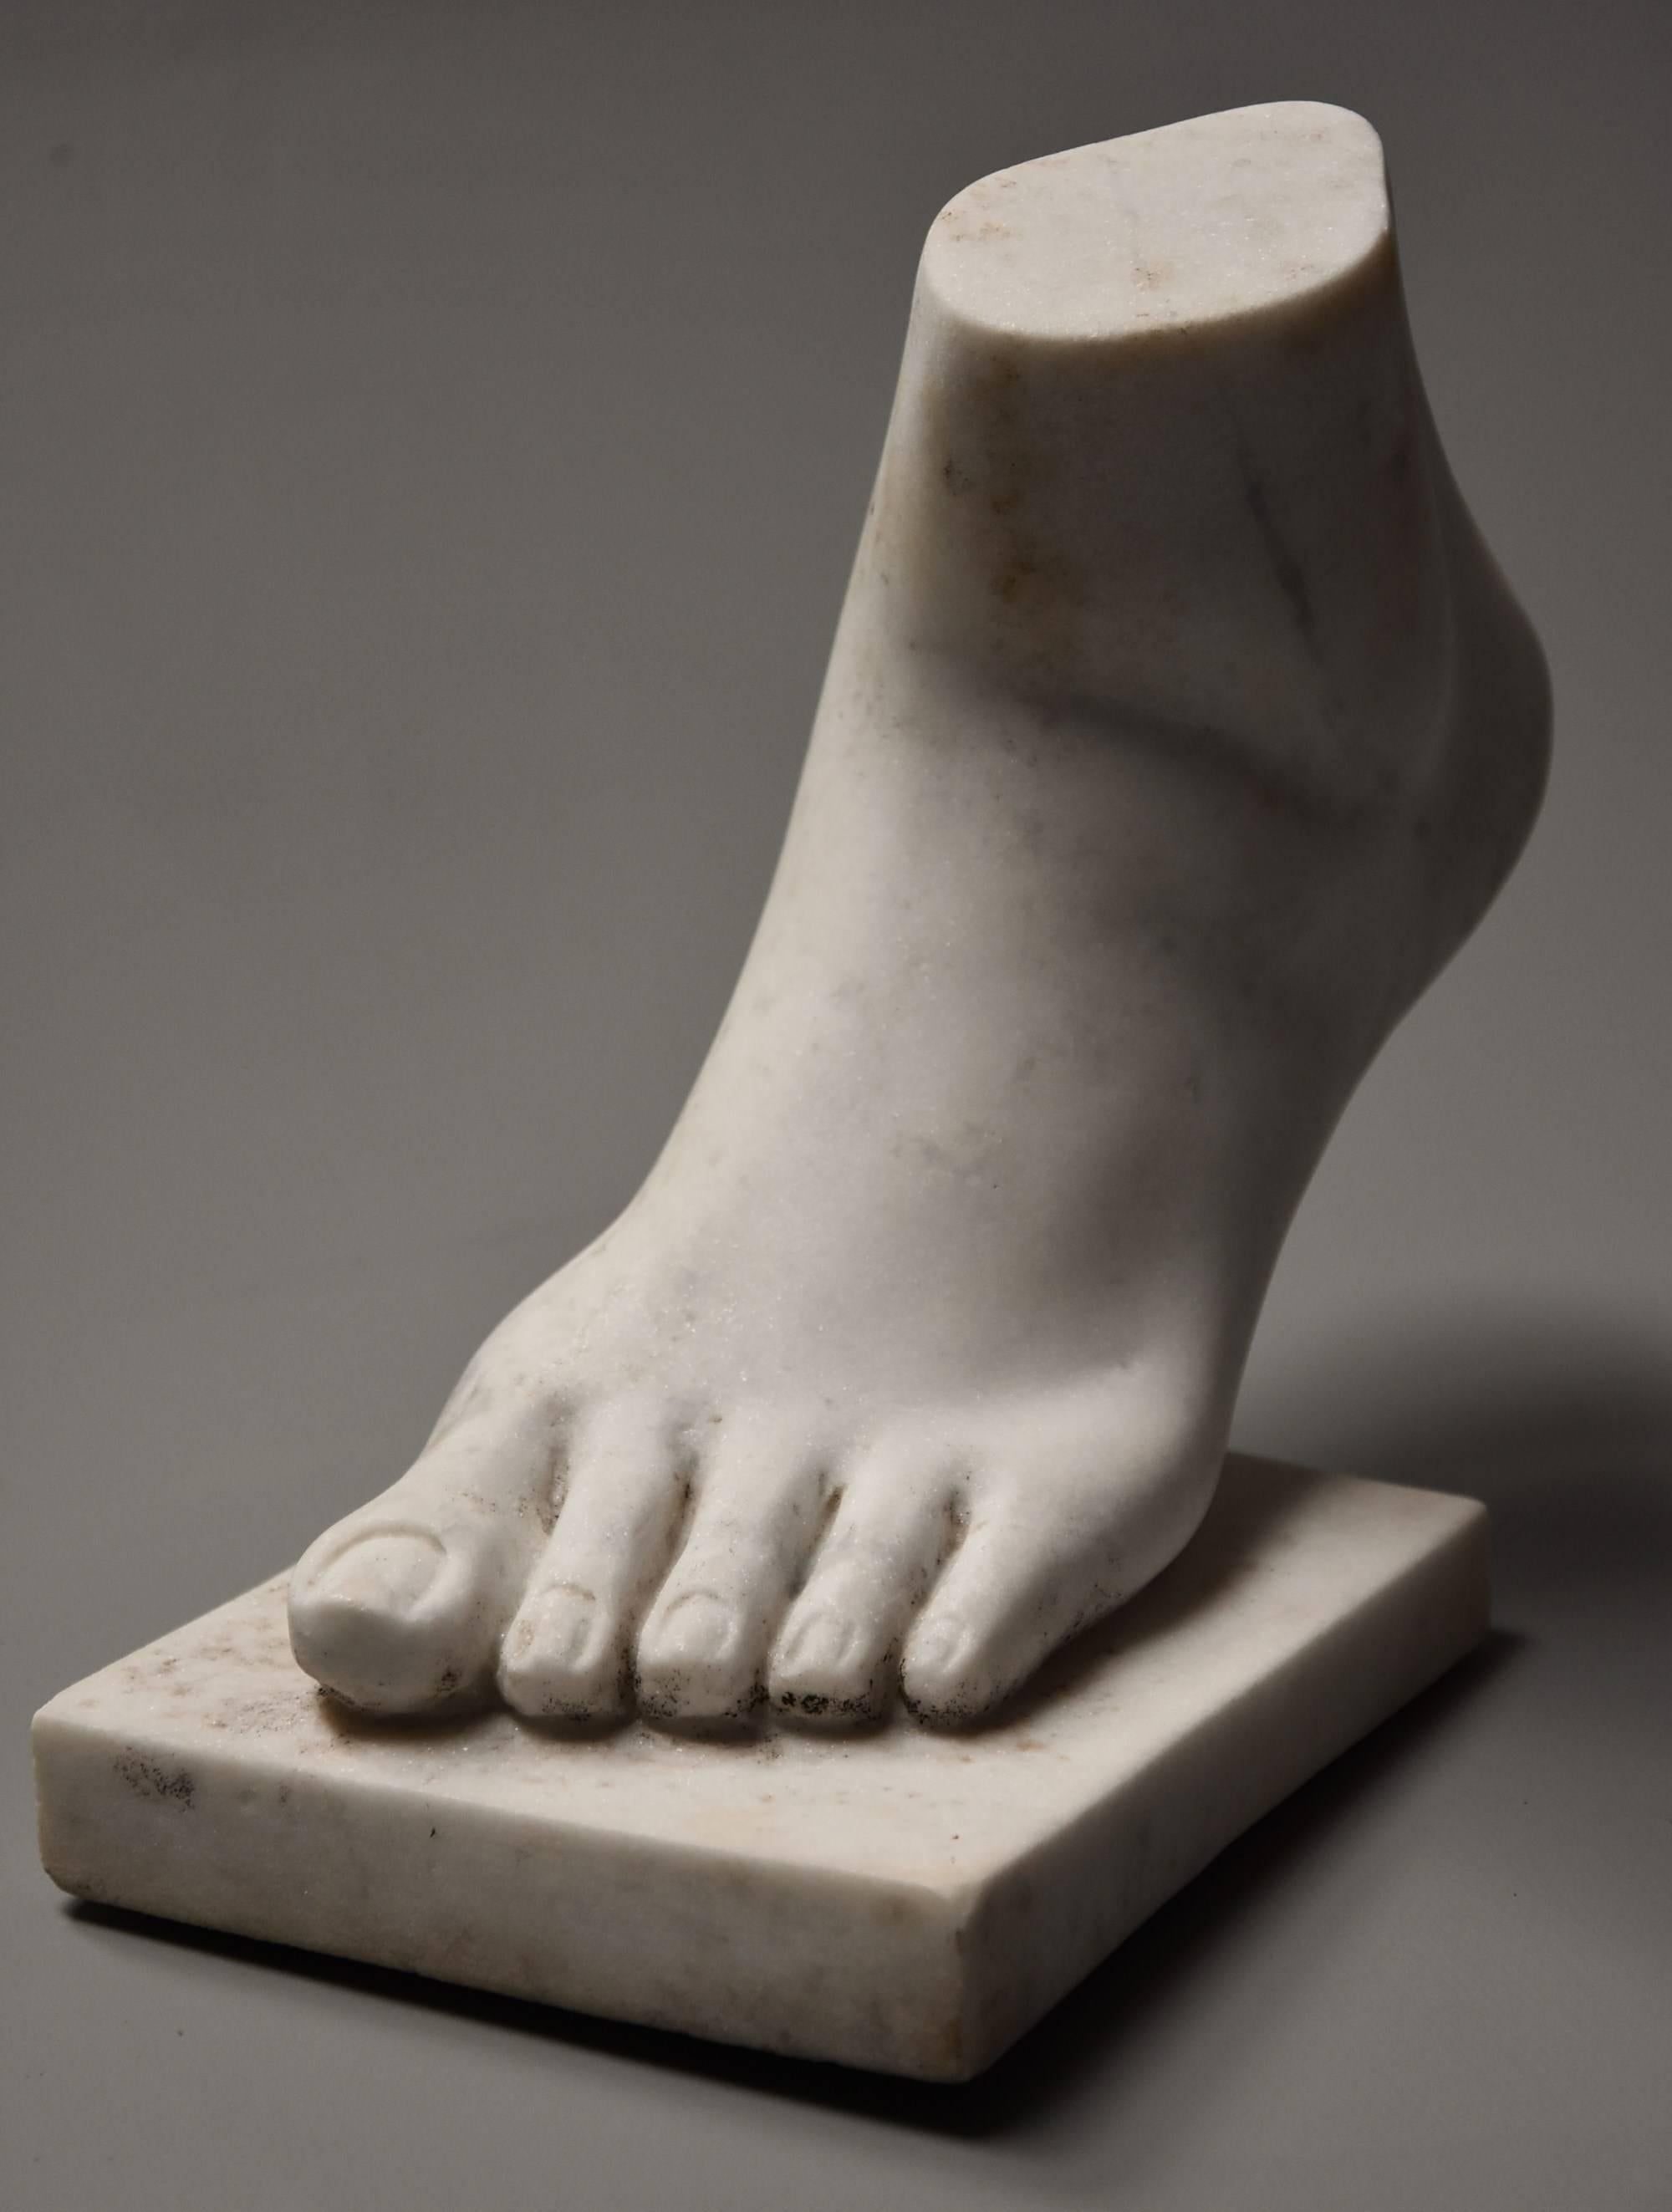 Carrara Marble Late 19th Century Grand Tour Style Marble Sculpture of a Foot, after the Antique